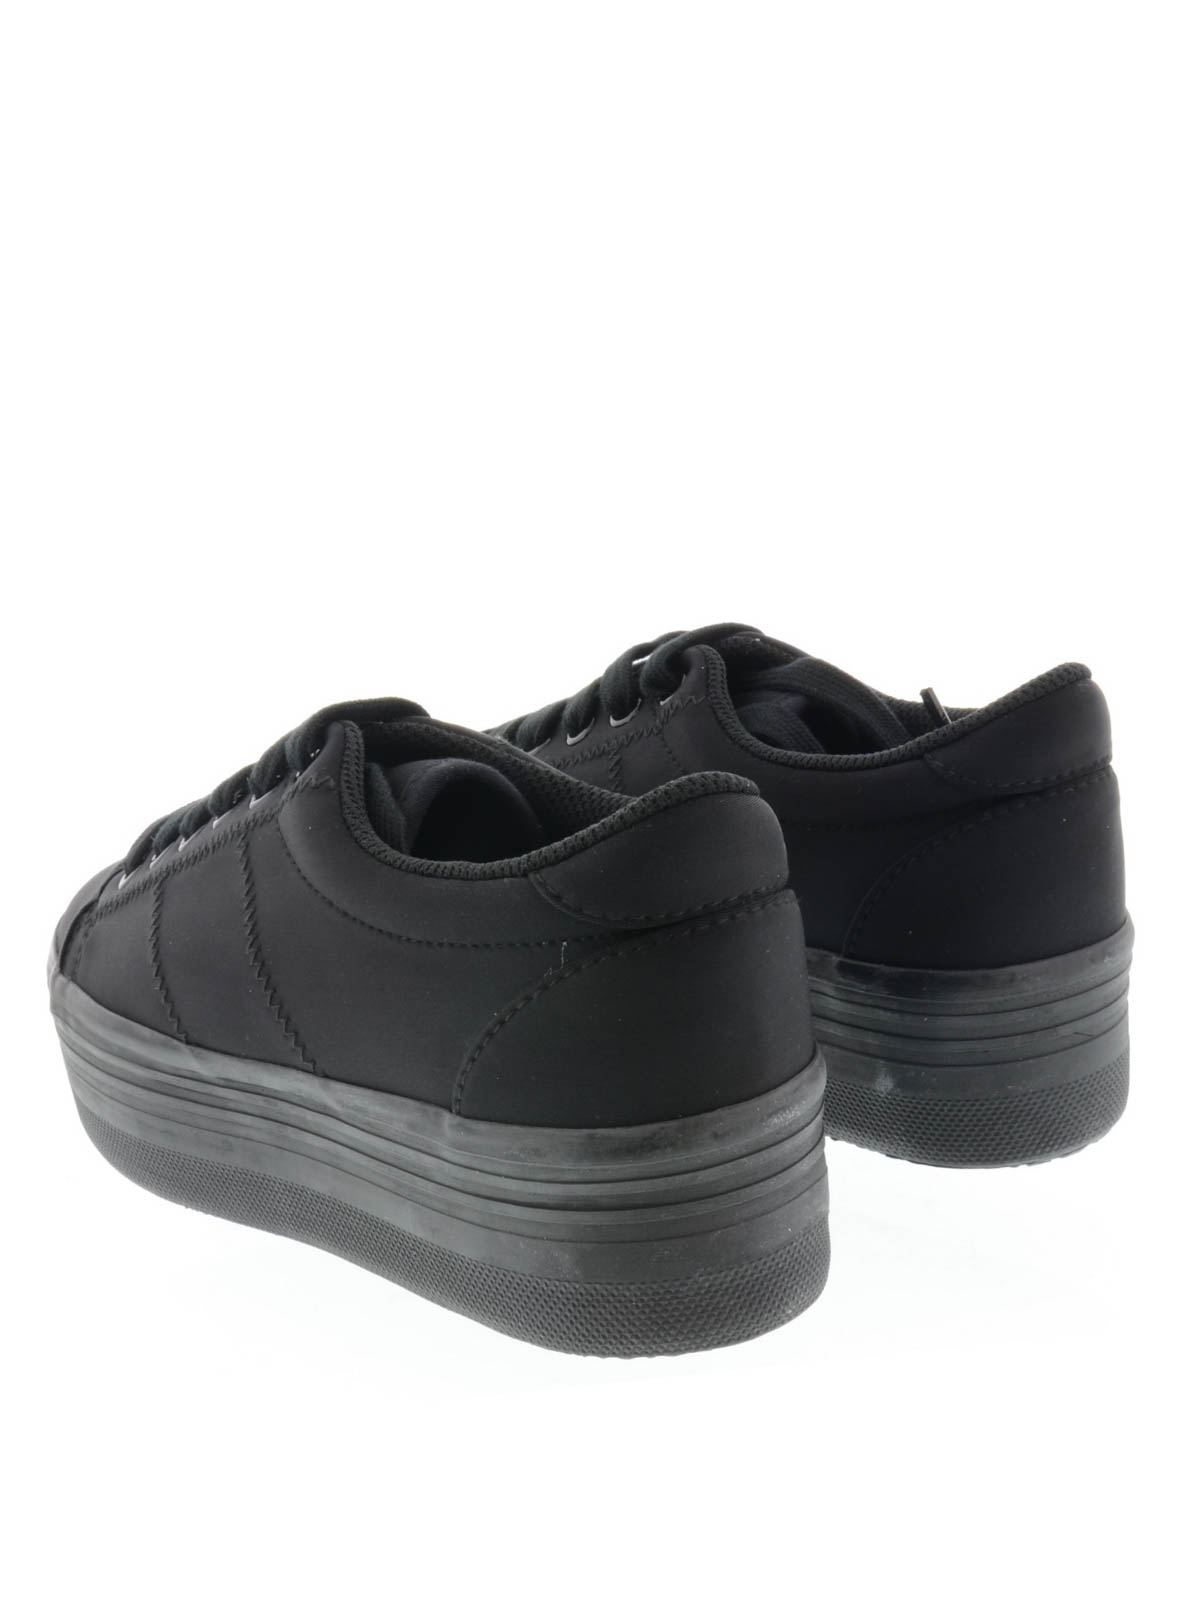 It offset Melodic Trainers Jeffrey Campbell - Zomg neoprene sneakers - ZOMGNEOPRENEBLACK